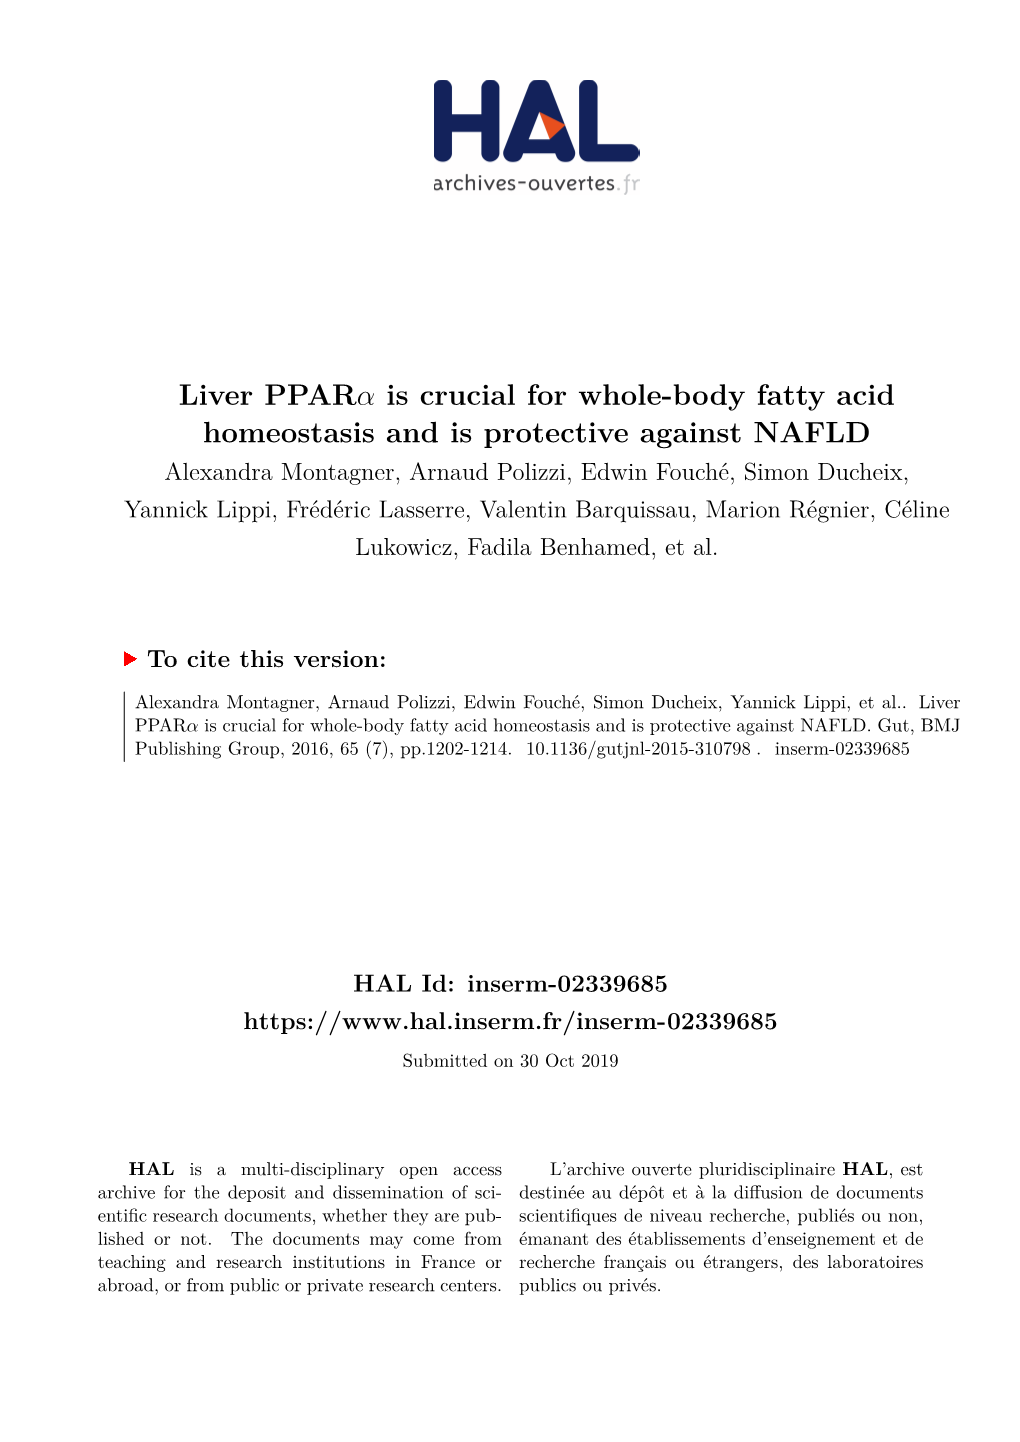 Liver PPAR Is Crucial for Whole-Body Fatty Acid Homeostasis and Is